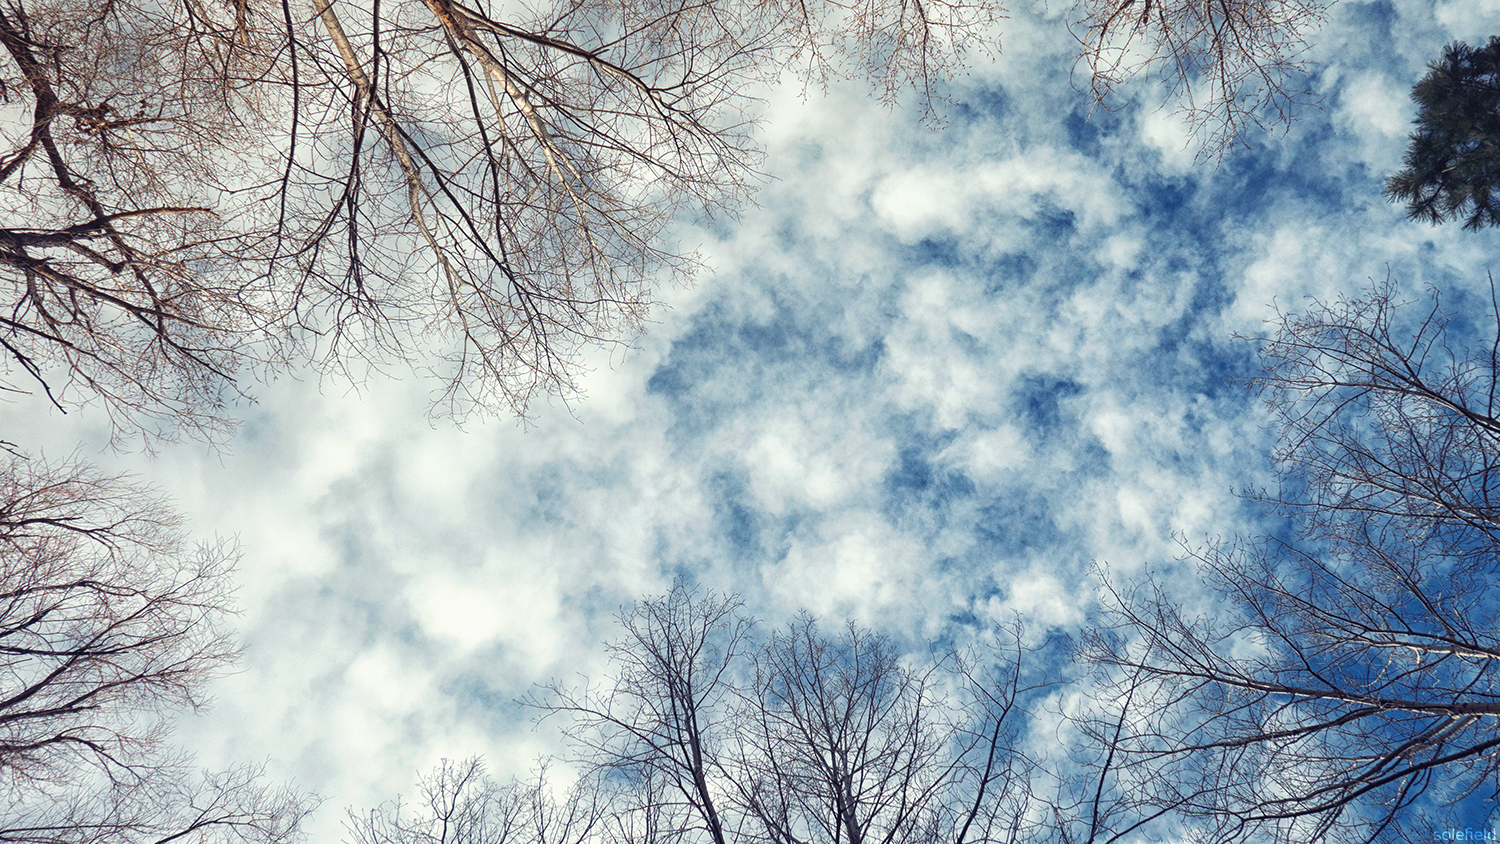 Looking up at clouds through winter trees